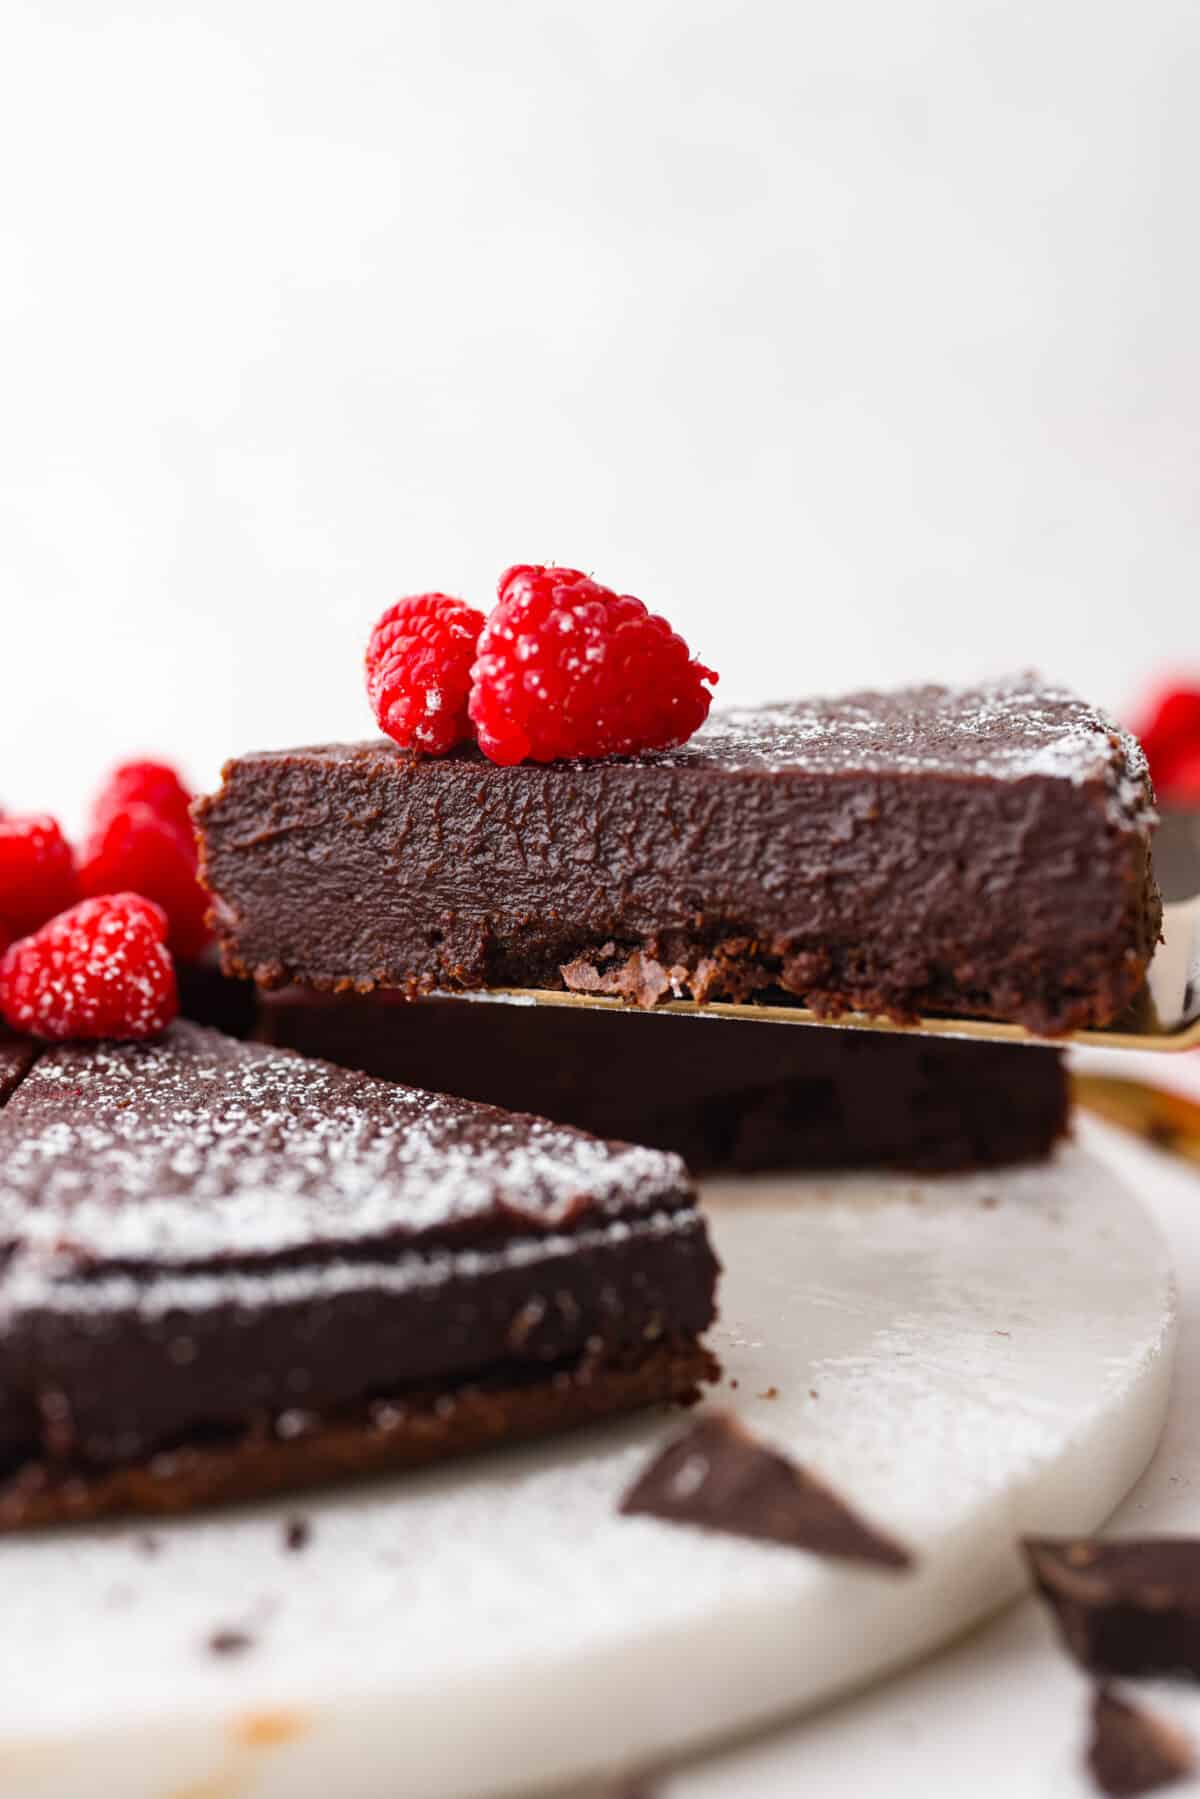 A slice of chocolate cake being served with a cake spatula. There are raspberries on top of the cake.